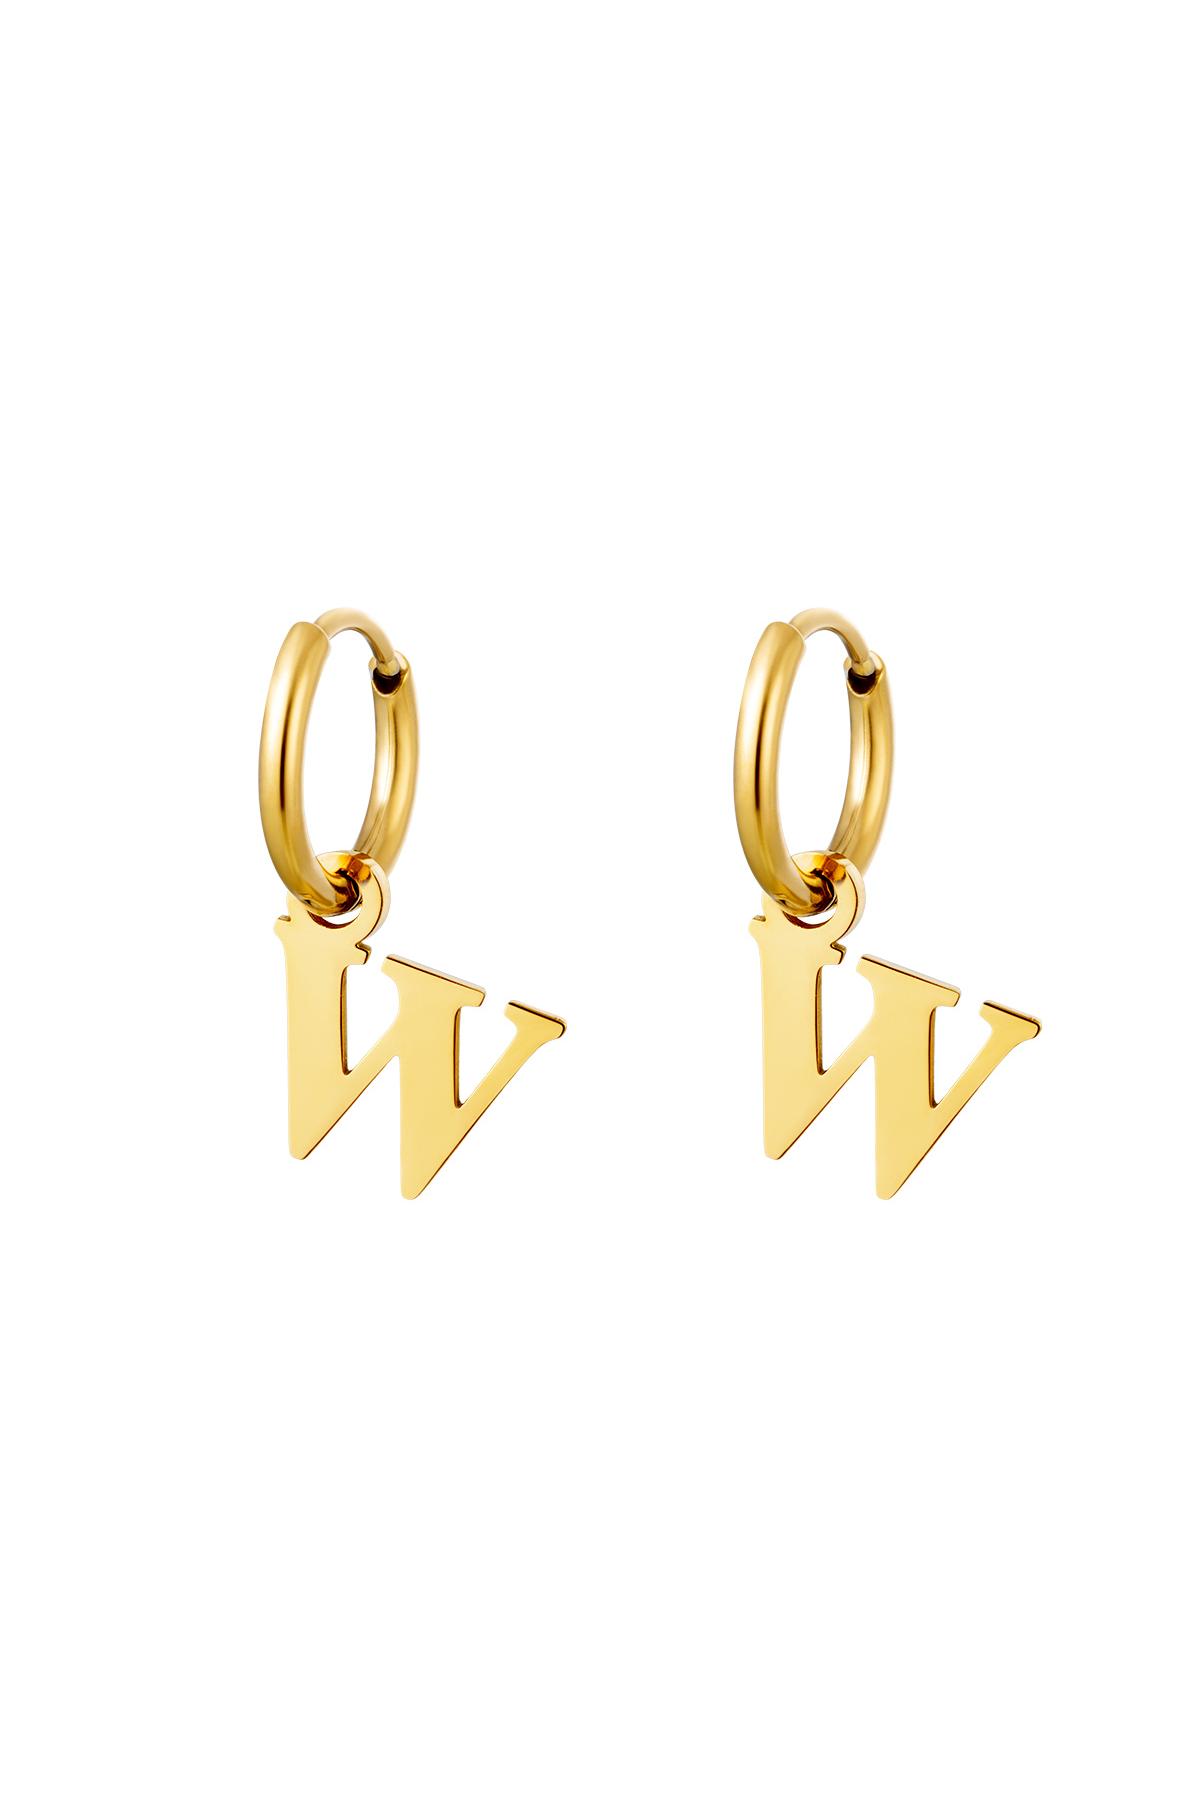 Earrings Stainless Steel Gold Initial W